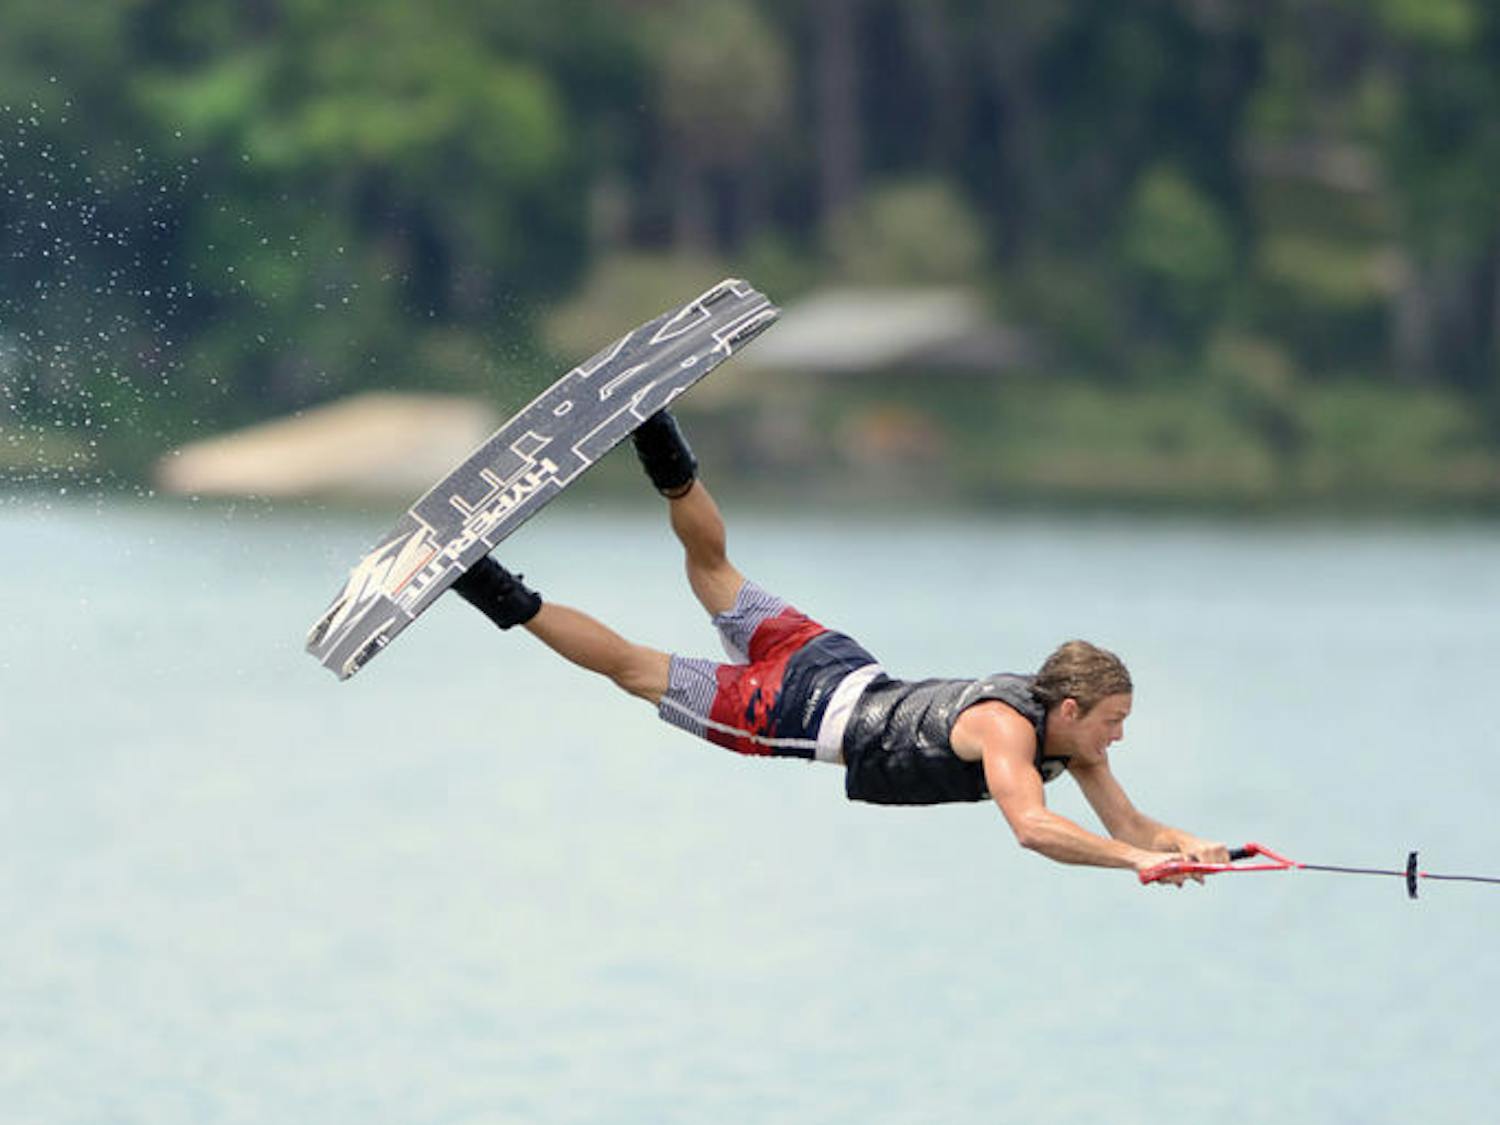 James Ort, 21, extends his body during a trick at Wakefest 2013. About 15 students performed in several categories of wakeboarding at Lake Wauburg.